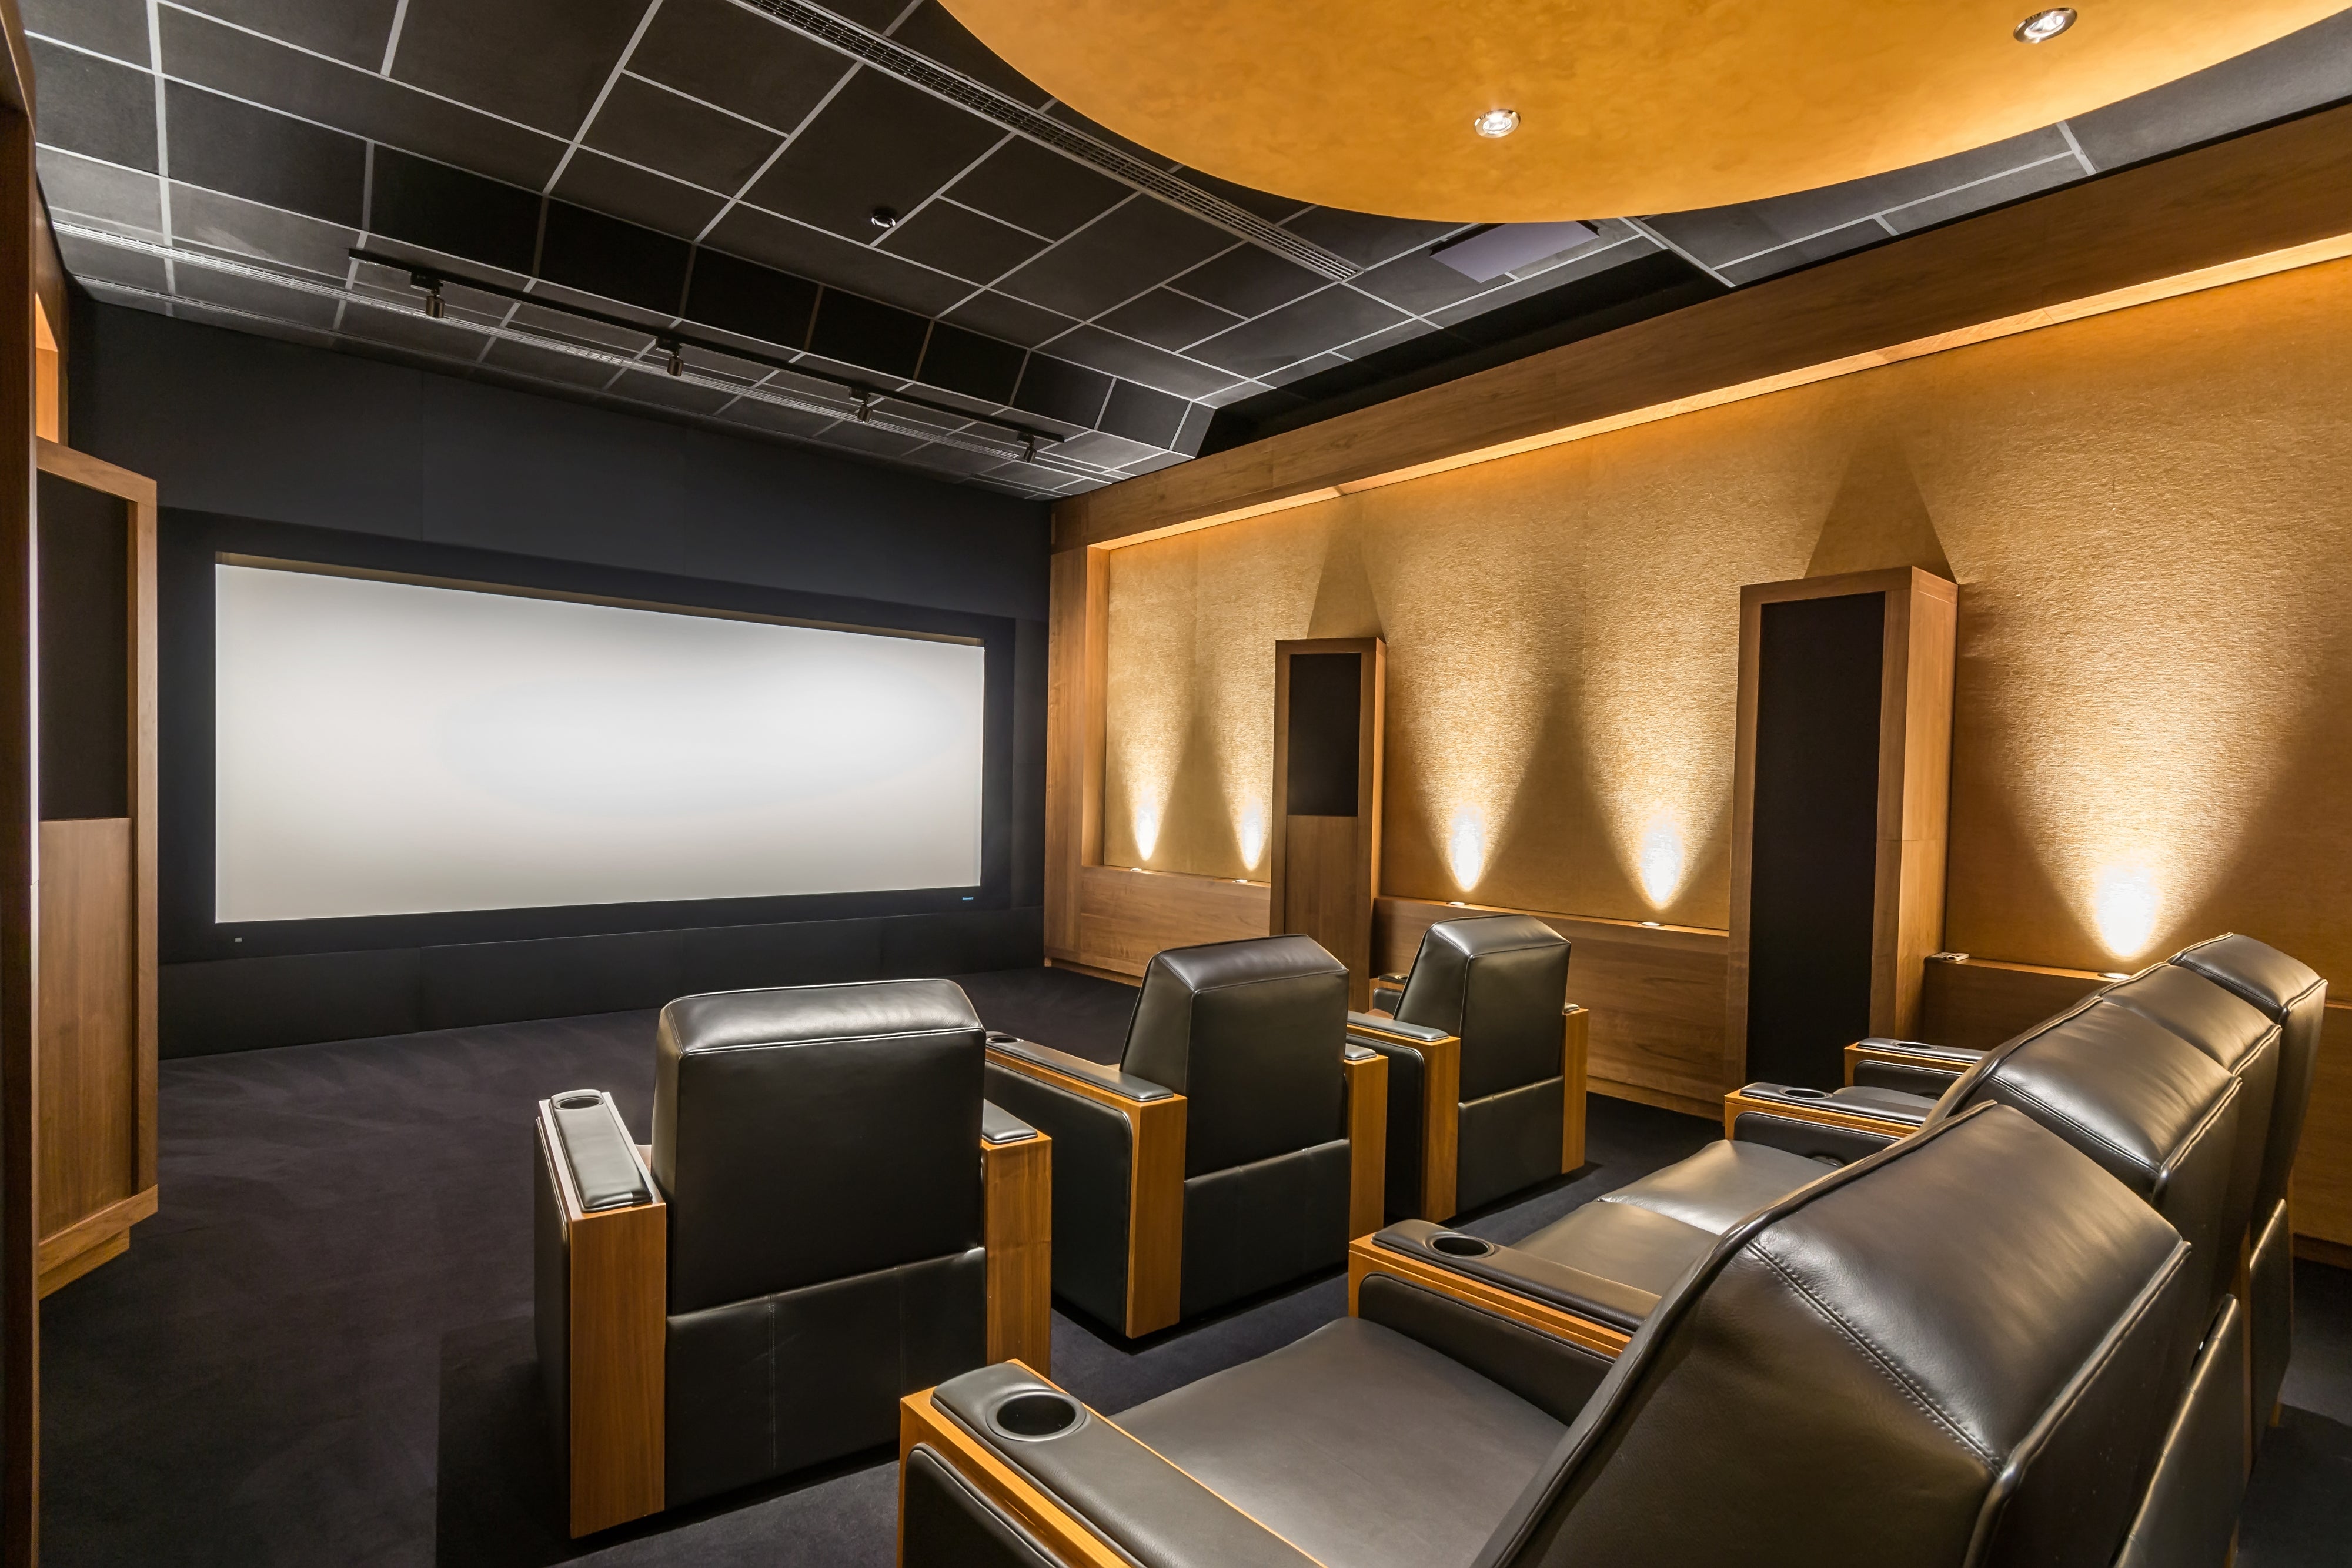 How to Decorate a Home Theater Room